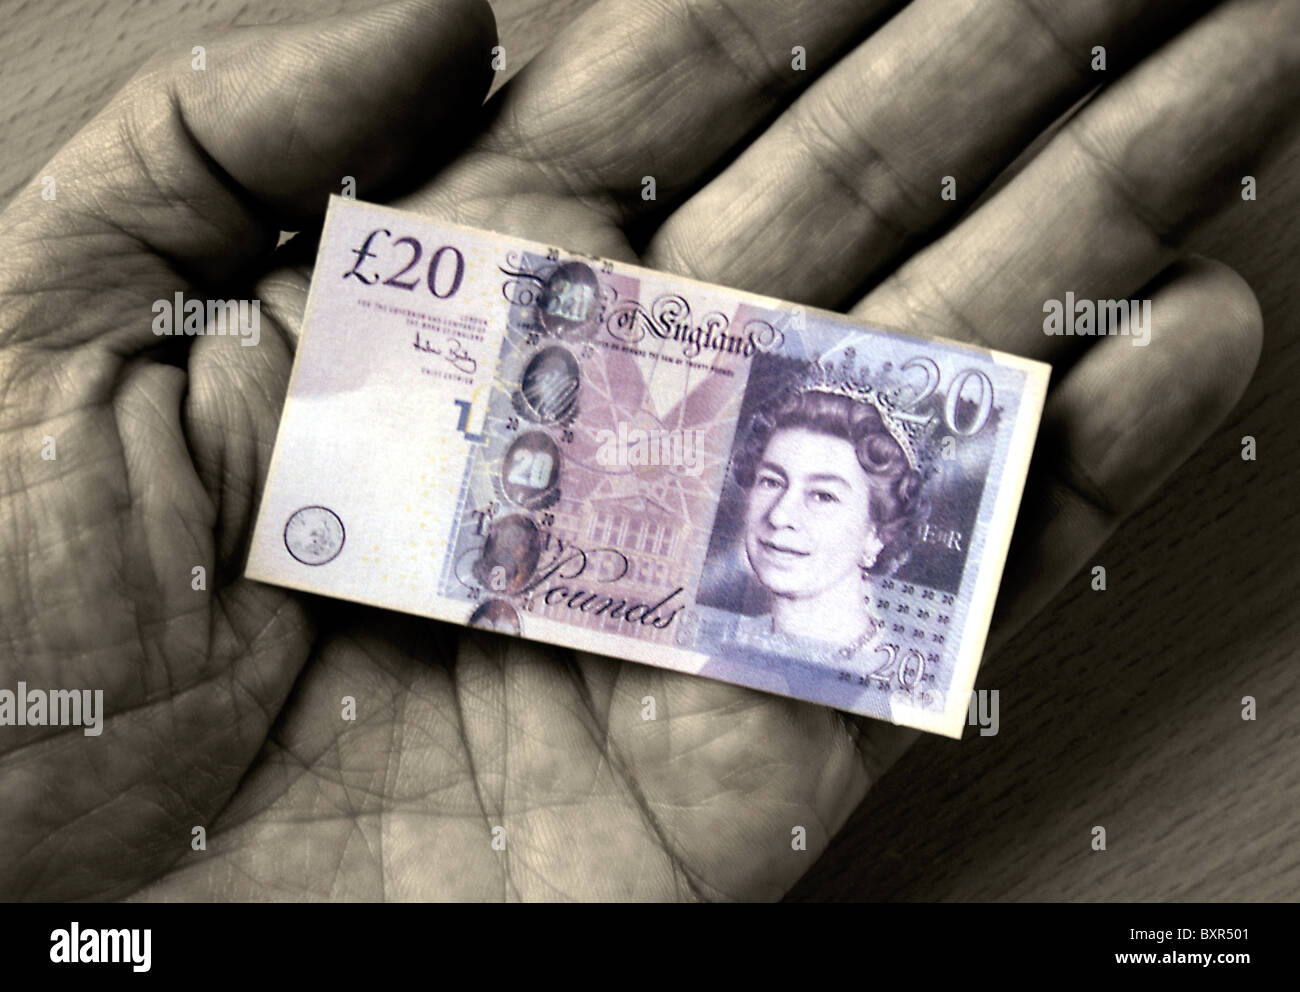 Brexit,Conceptual image of a Shrinking sterling note in the palm of a male hand, depicting UK inflation increase, reduced pound, Stock Photo